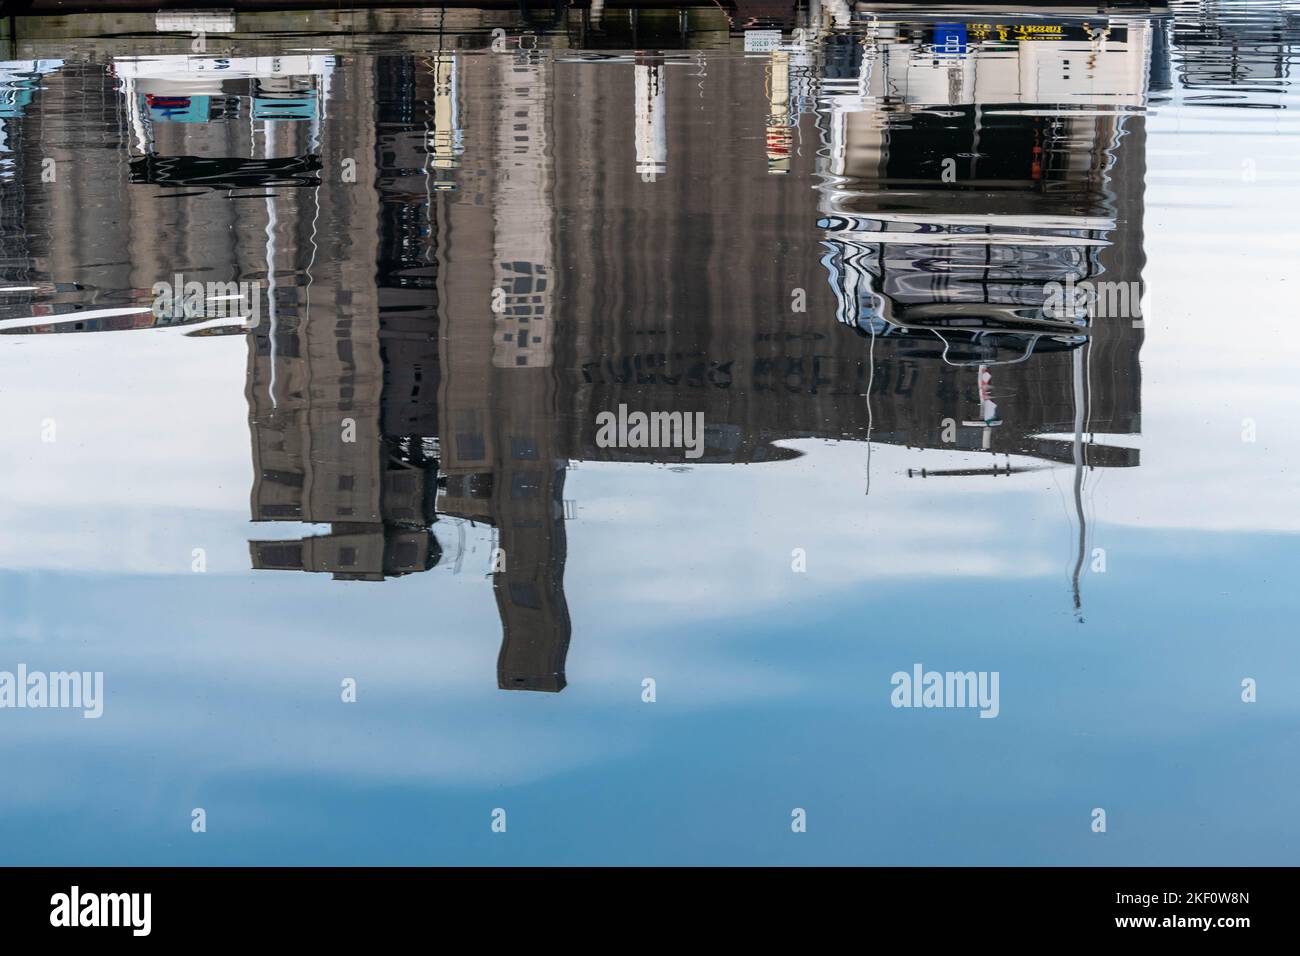 Canada Malting silos historical building reflection on the surface of lake Ontario at Toronto harbourfront Stock Photo